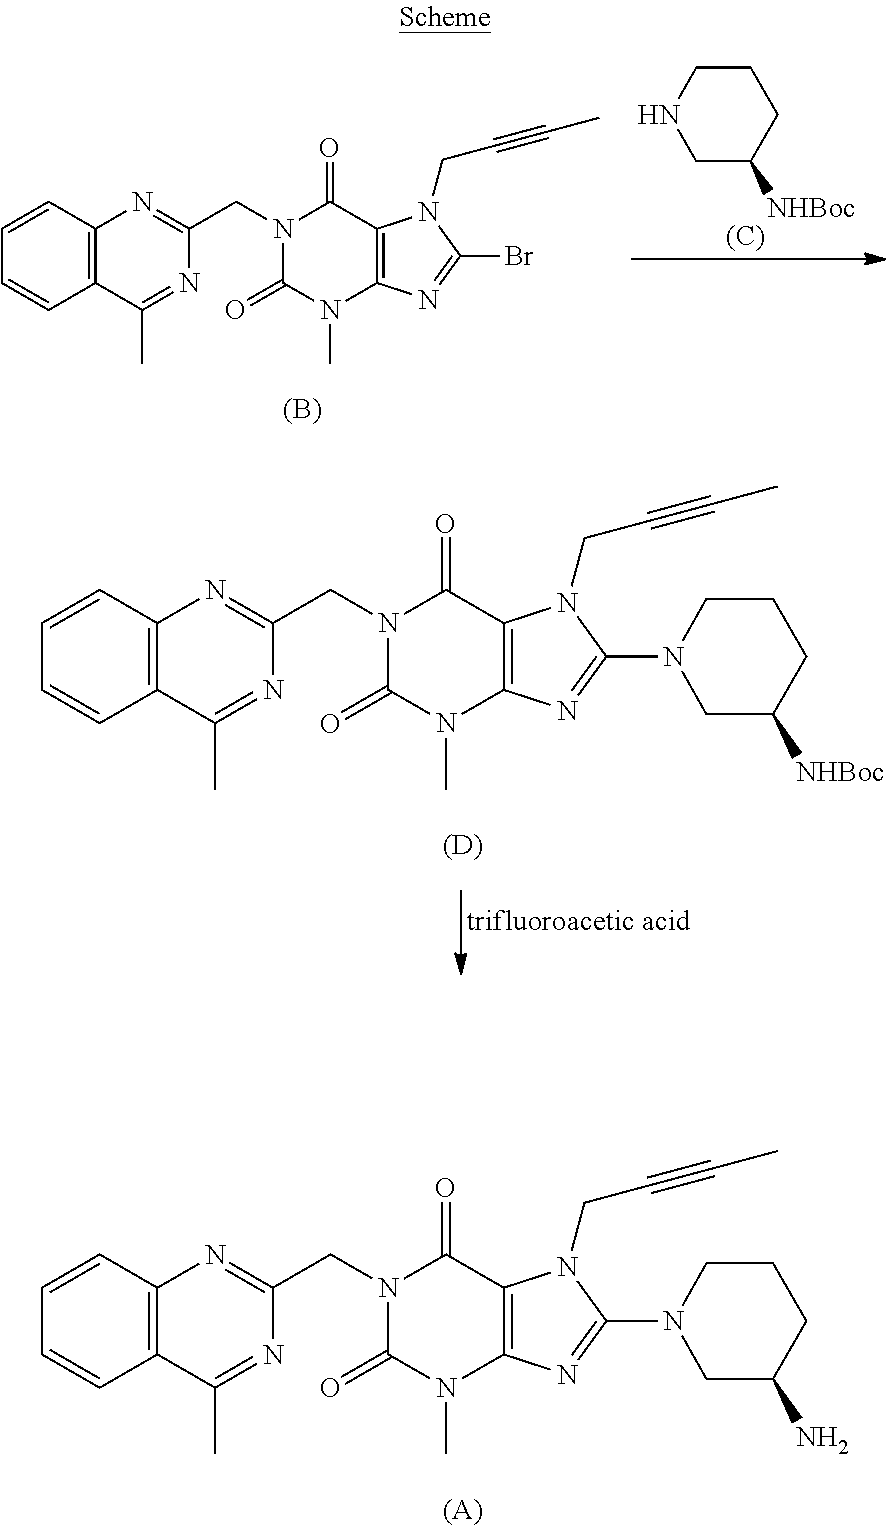 Process for the preparation of linagliptin